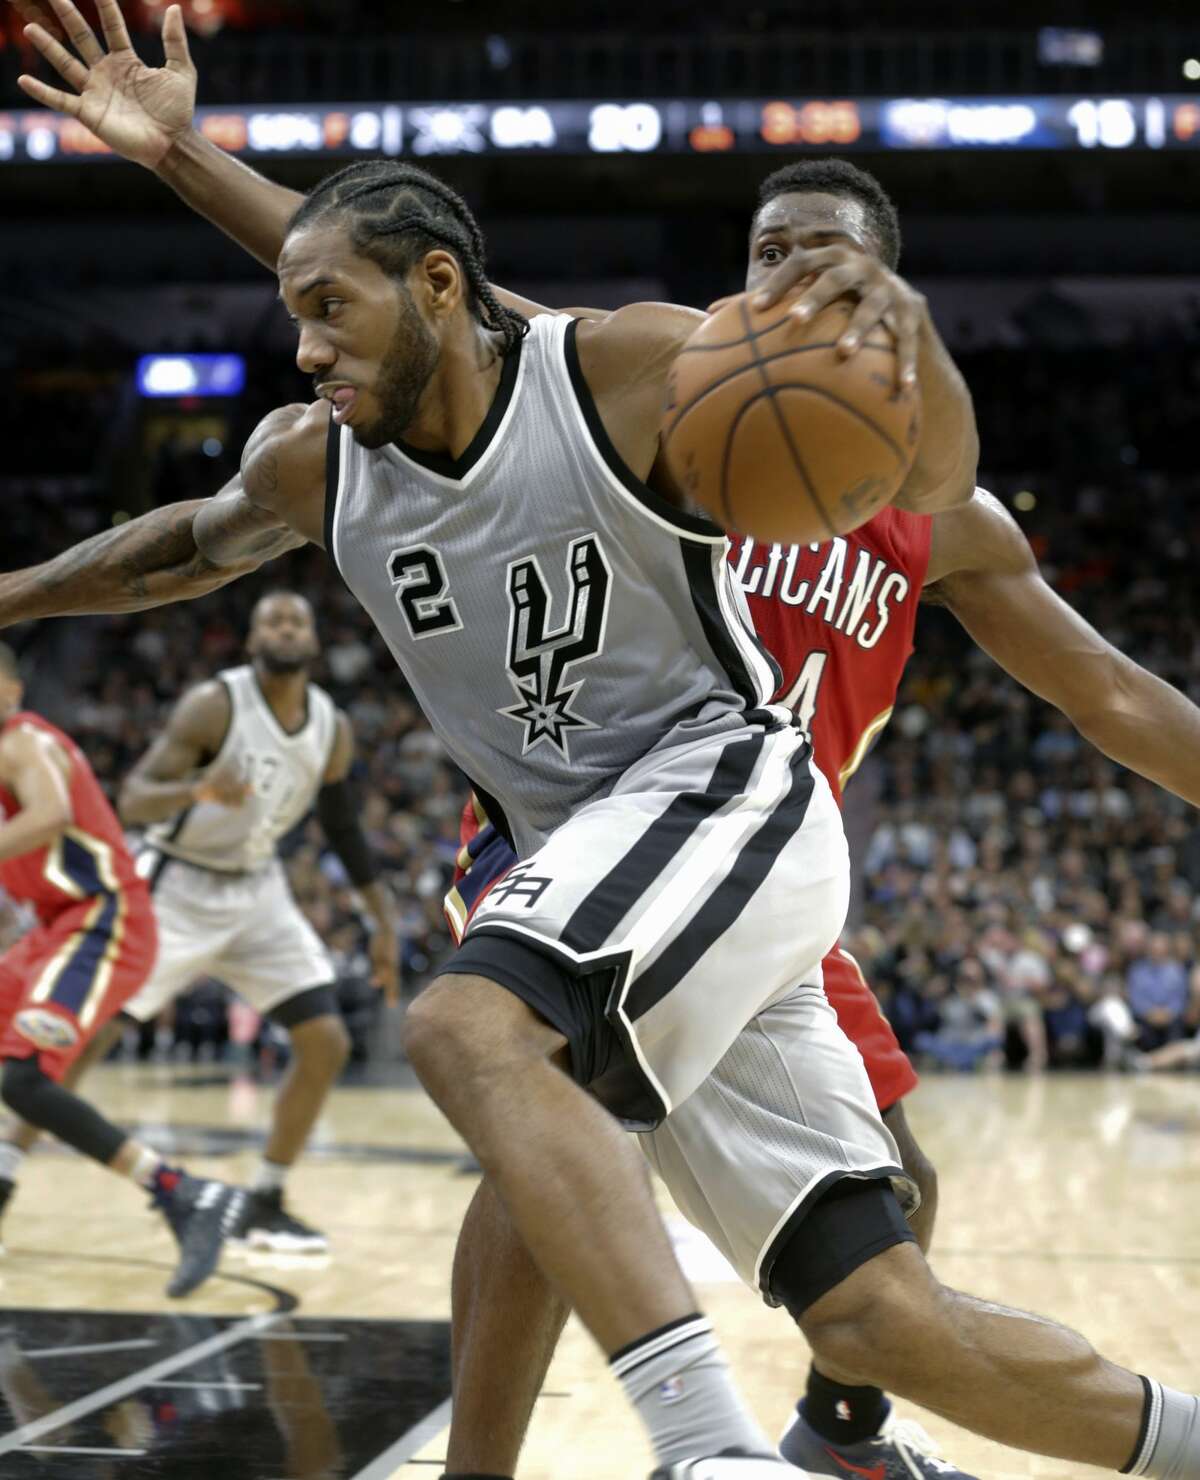 Kawhi Leonard drives the lane as the Spurs host the Pelicans at the AT&T Center on October 29, 2016.